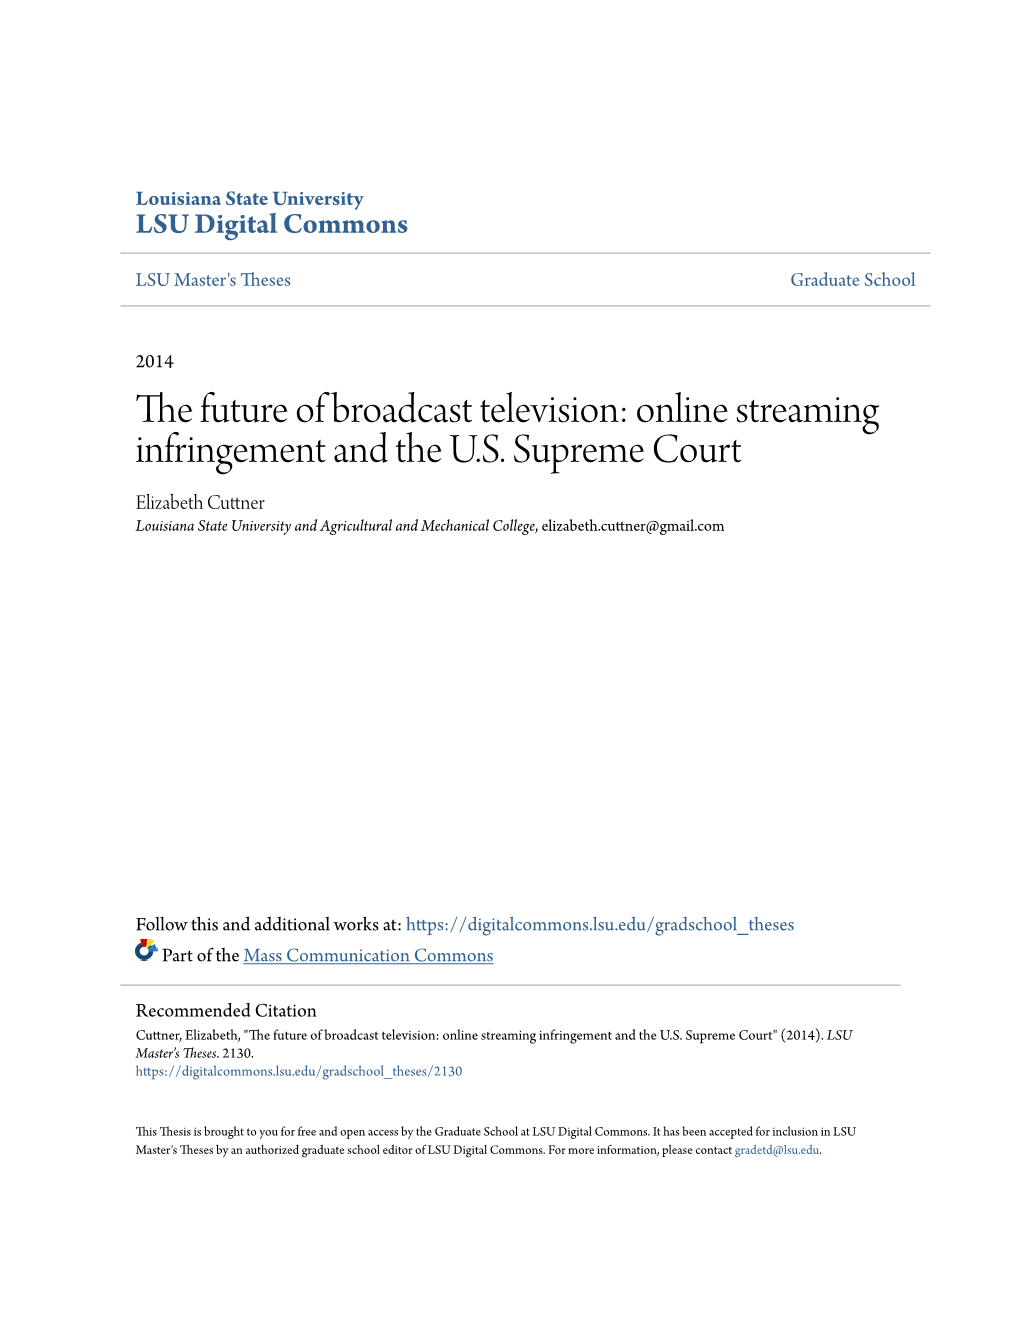 The Future of Broadcast Television: Online Streaming Infringement and the U.S